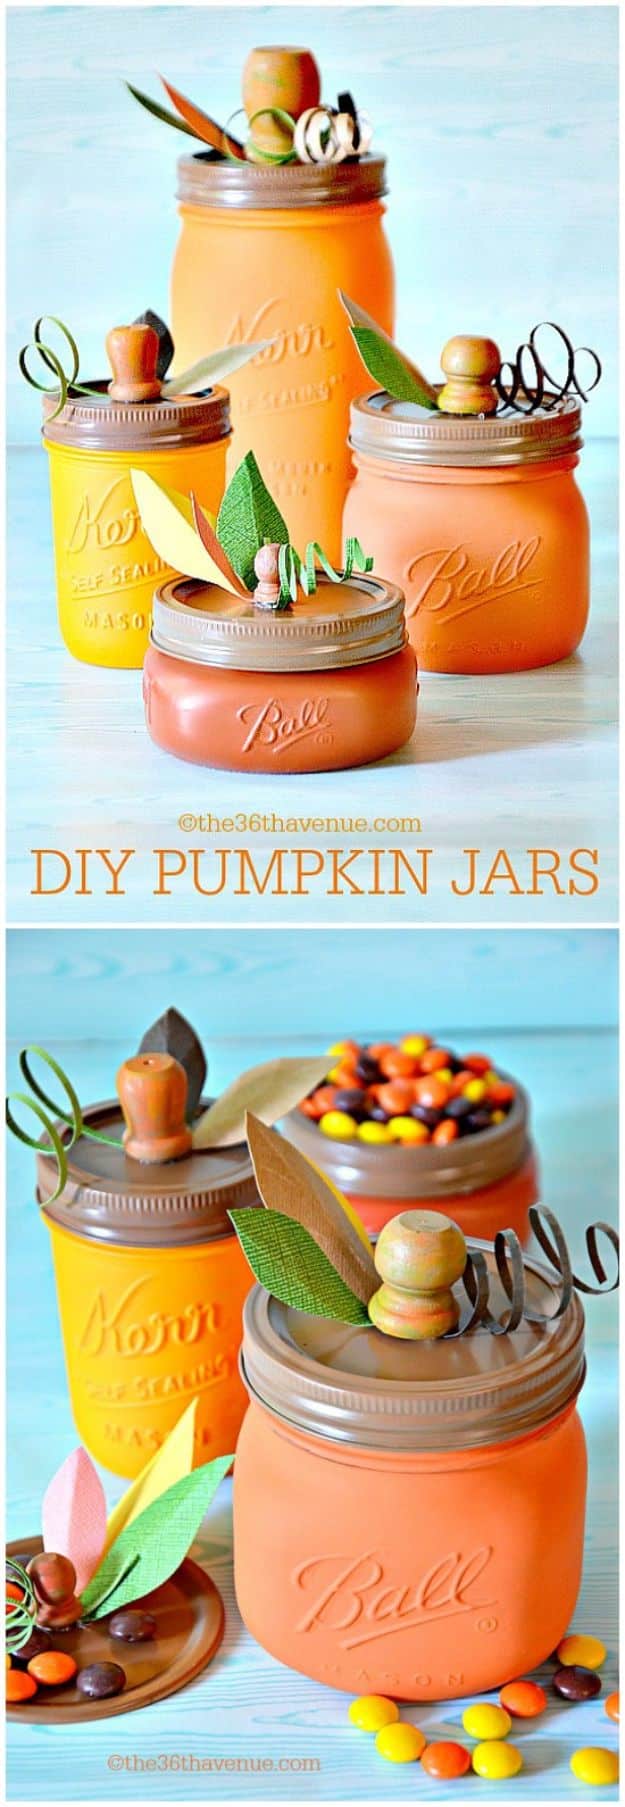 Best Mason Jar Crafts for Fall - DIY Pumpkin Mason Jars - DIY Mason Jar Ideas for Centerpieces, Wedding Decorations, Homemade Gifts, Craft Projects with Leaves, Flowers and Burlap, Painted Art, Candles and Luminaries for Cool Home Decor 